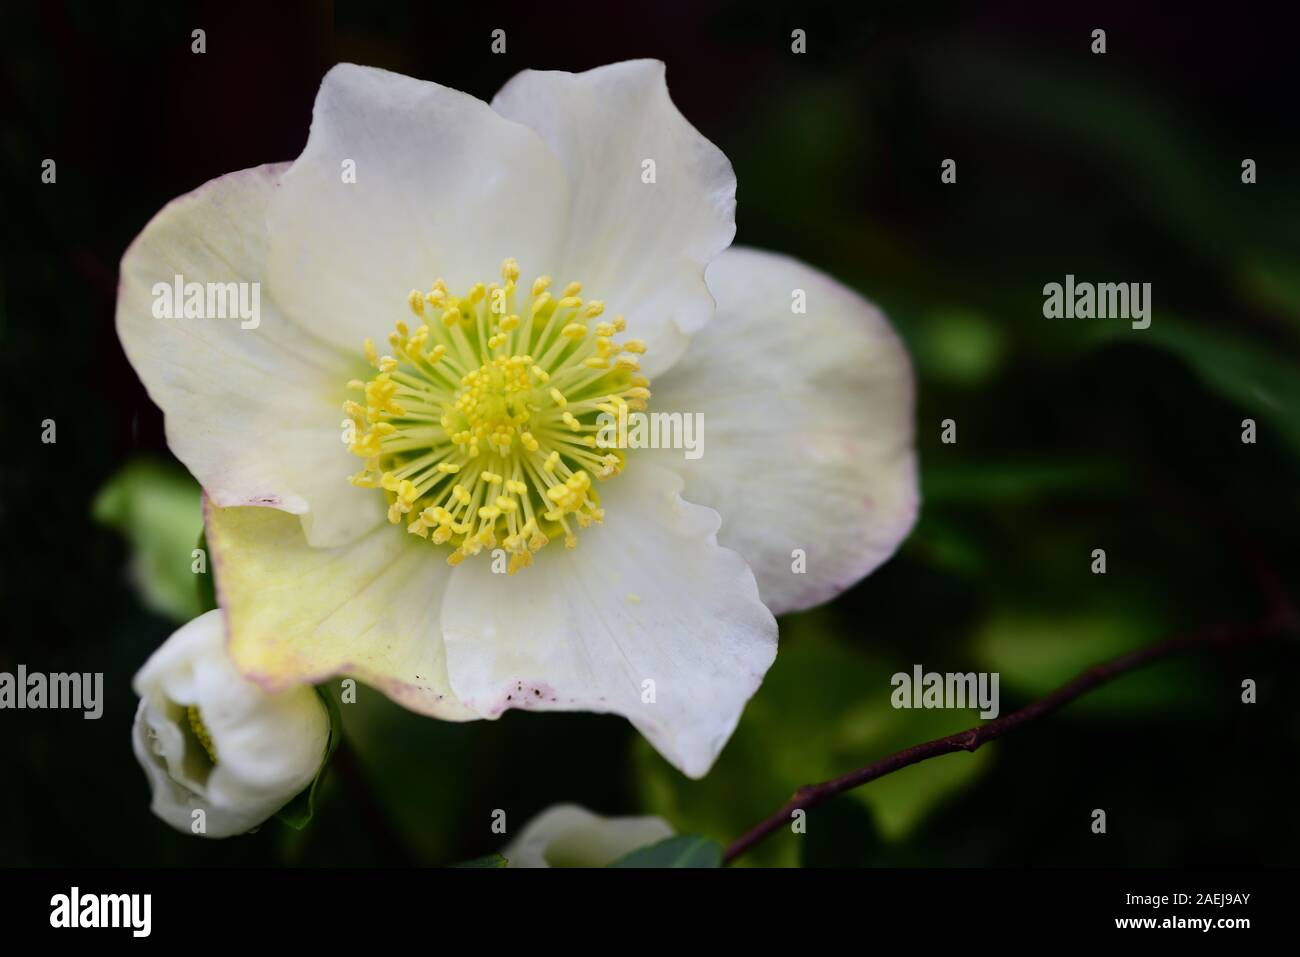 Closeup of a white Christmas rose with petals, pollen and leaves in winter Stock Photo